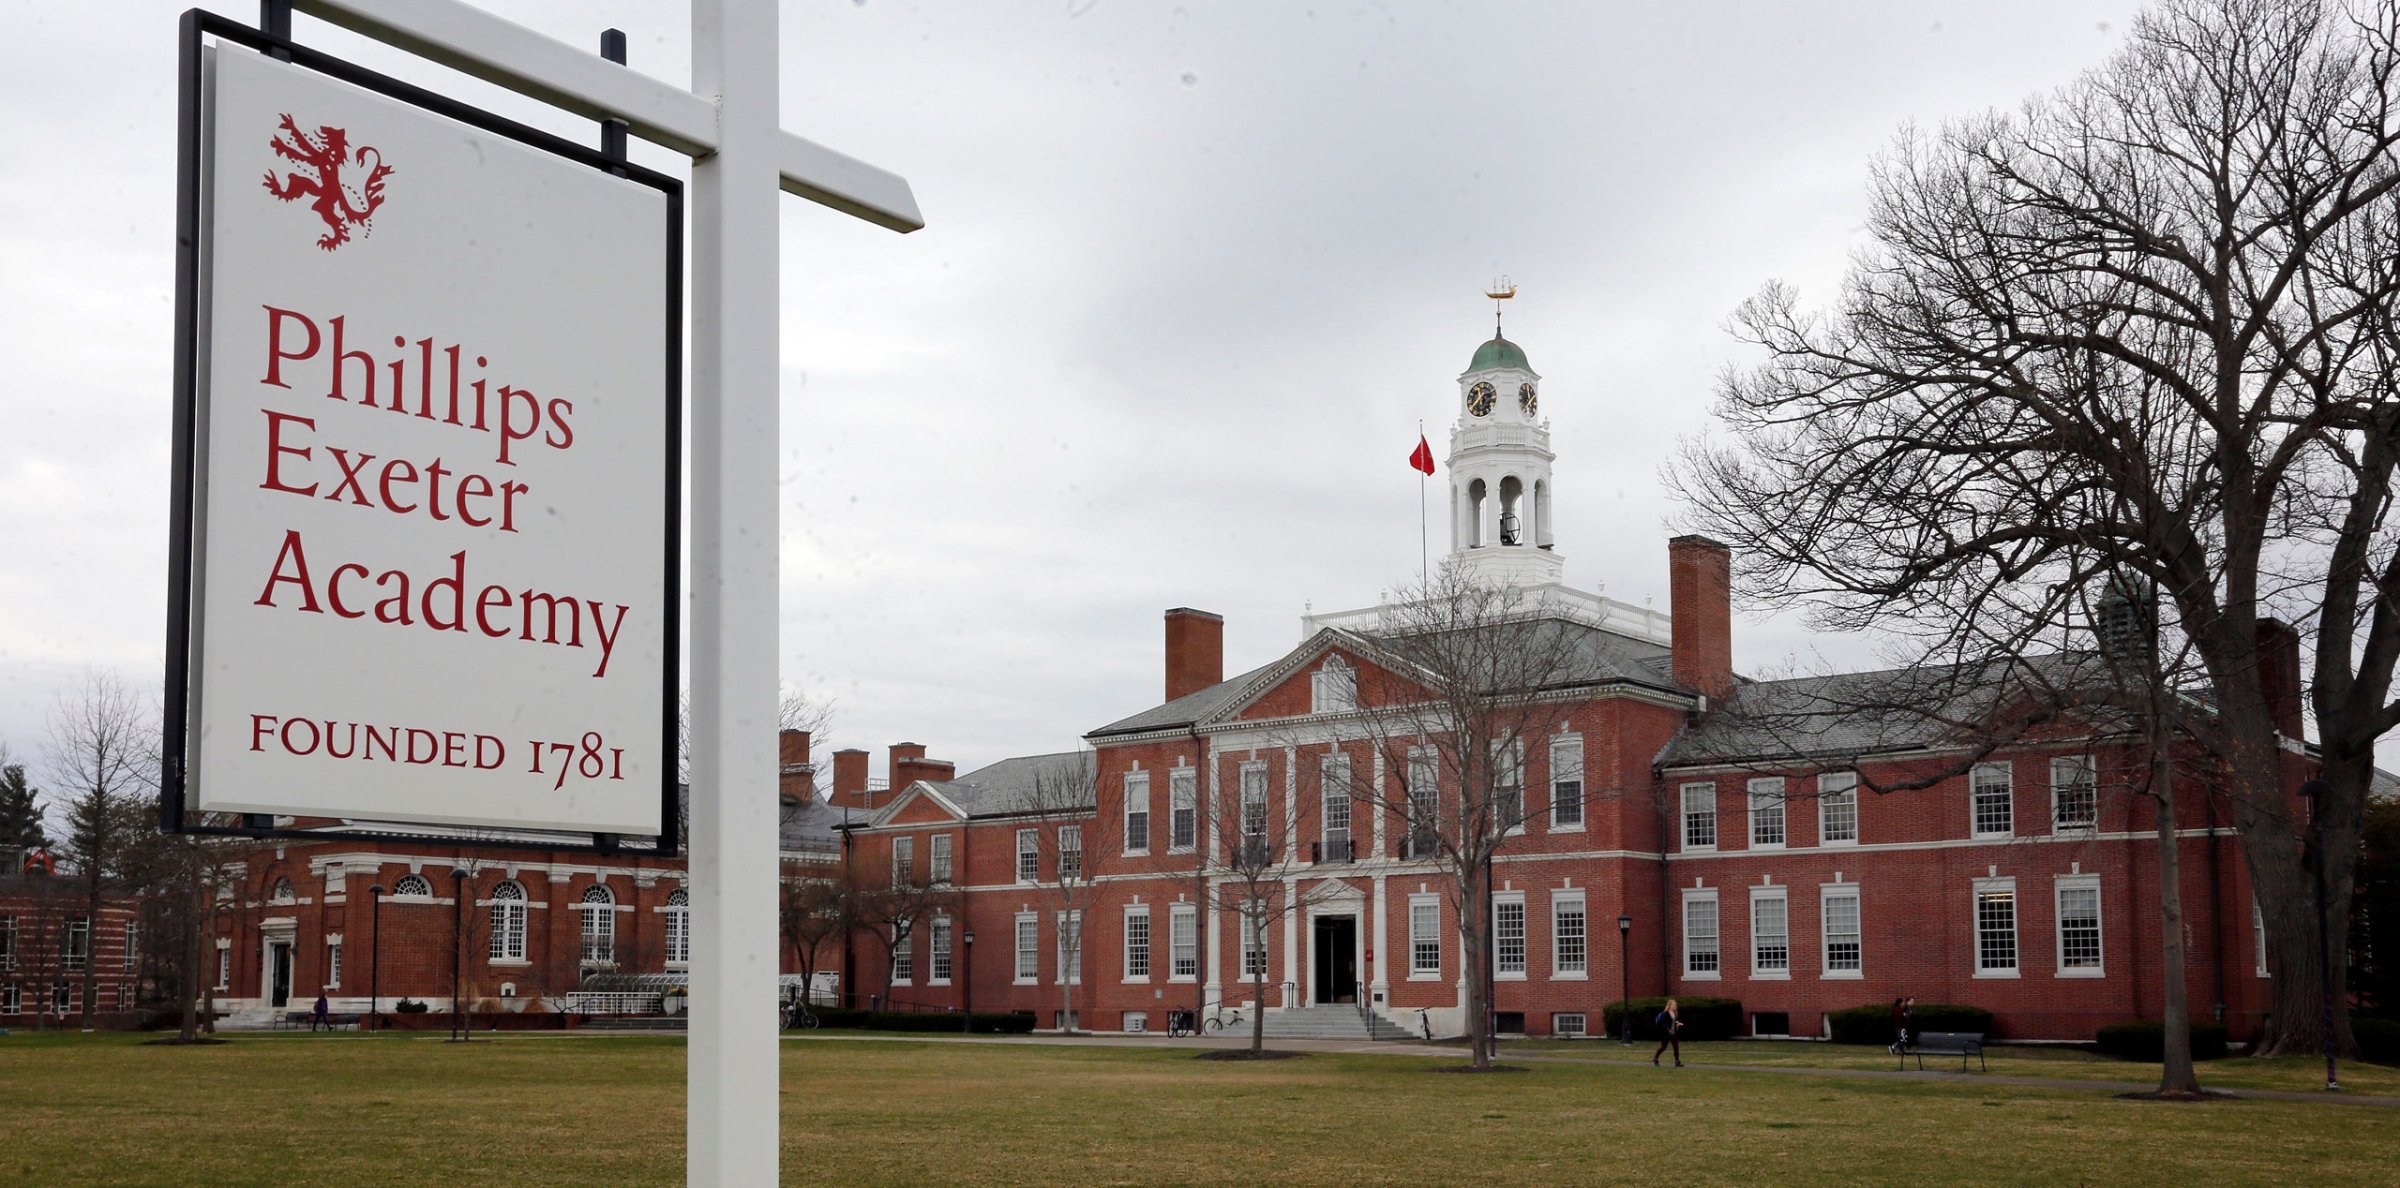 Part of the campus of the prestigious Phillips Exeter Academy is seen in Exeter, N.H. The principal of the elite prep school dealing with a series of sexual abuse allegations acknowledged on April 22, 2016.